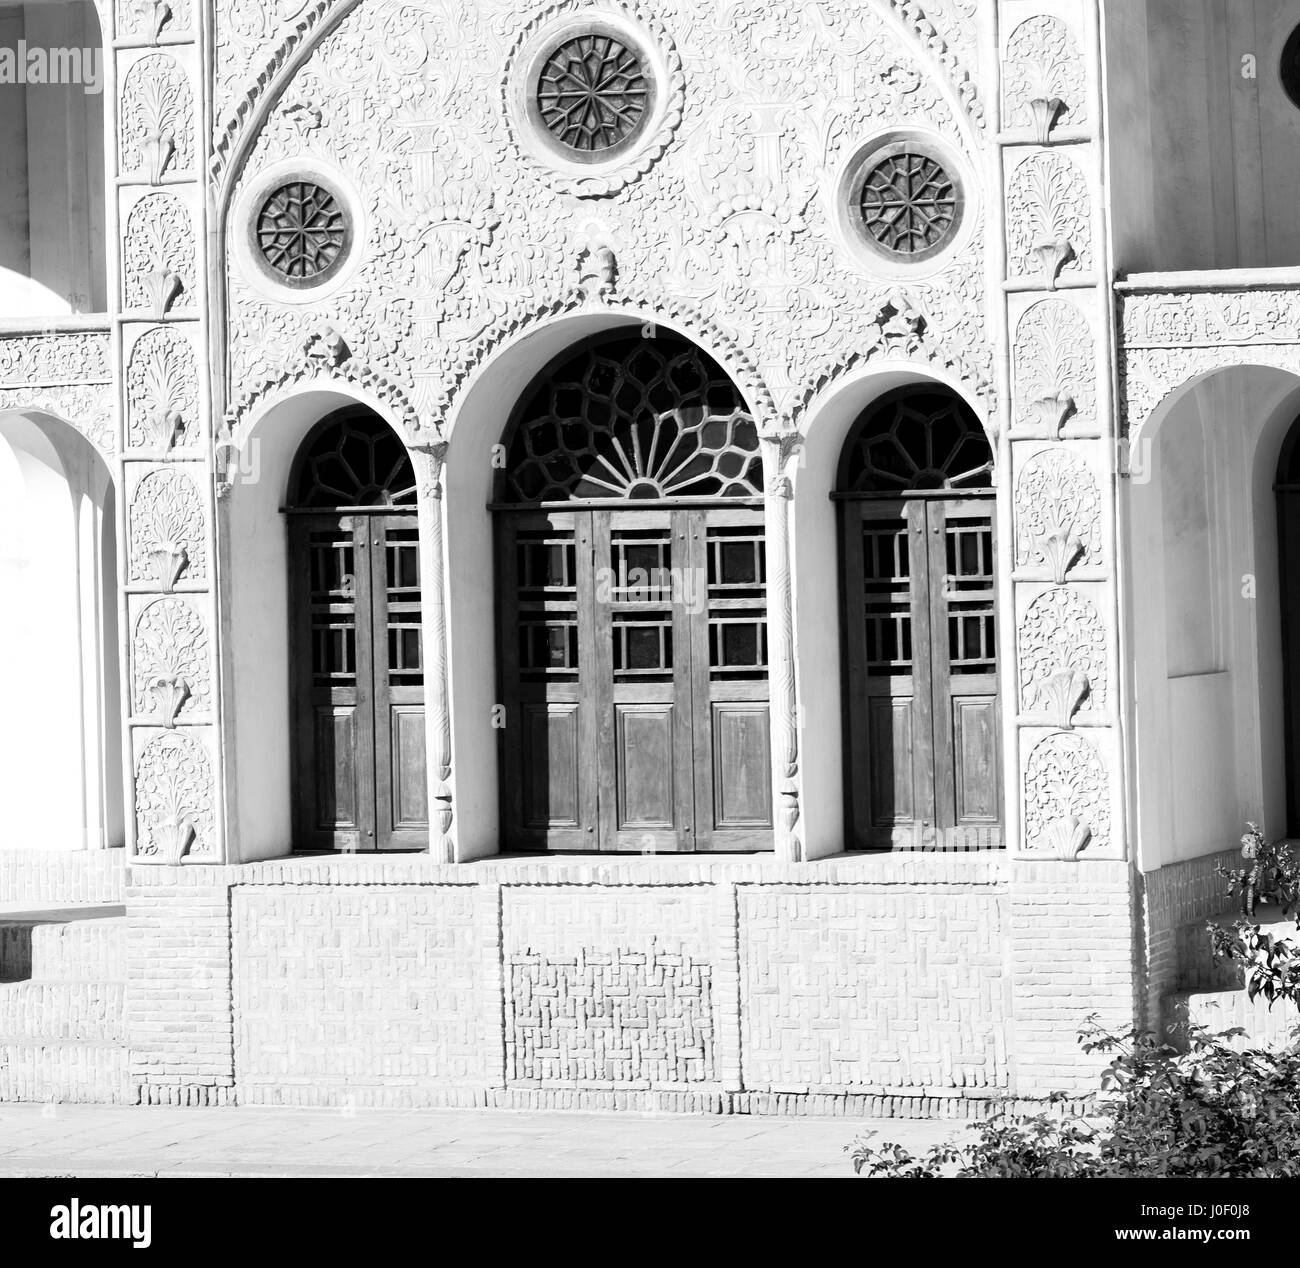 blur in iran kashan the old persian architecture window and glass in background Stock Photo